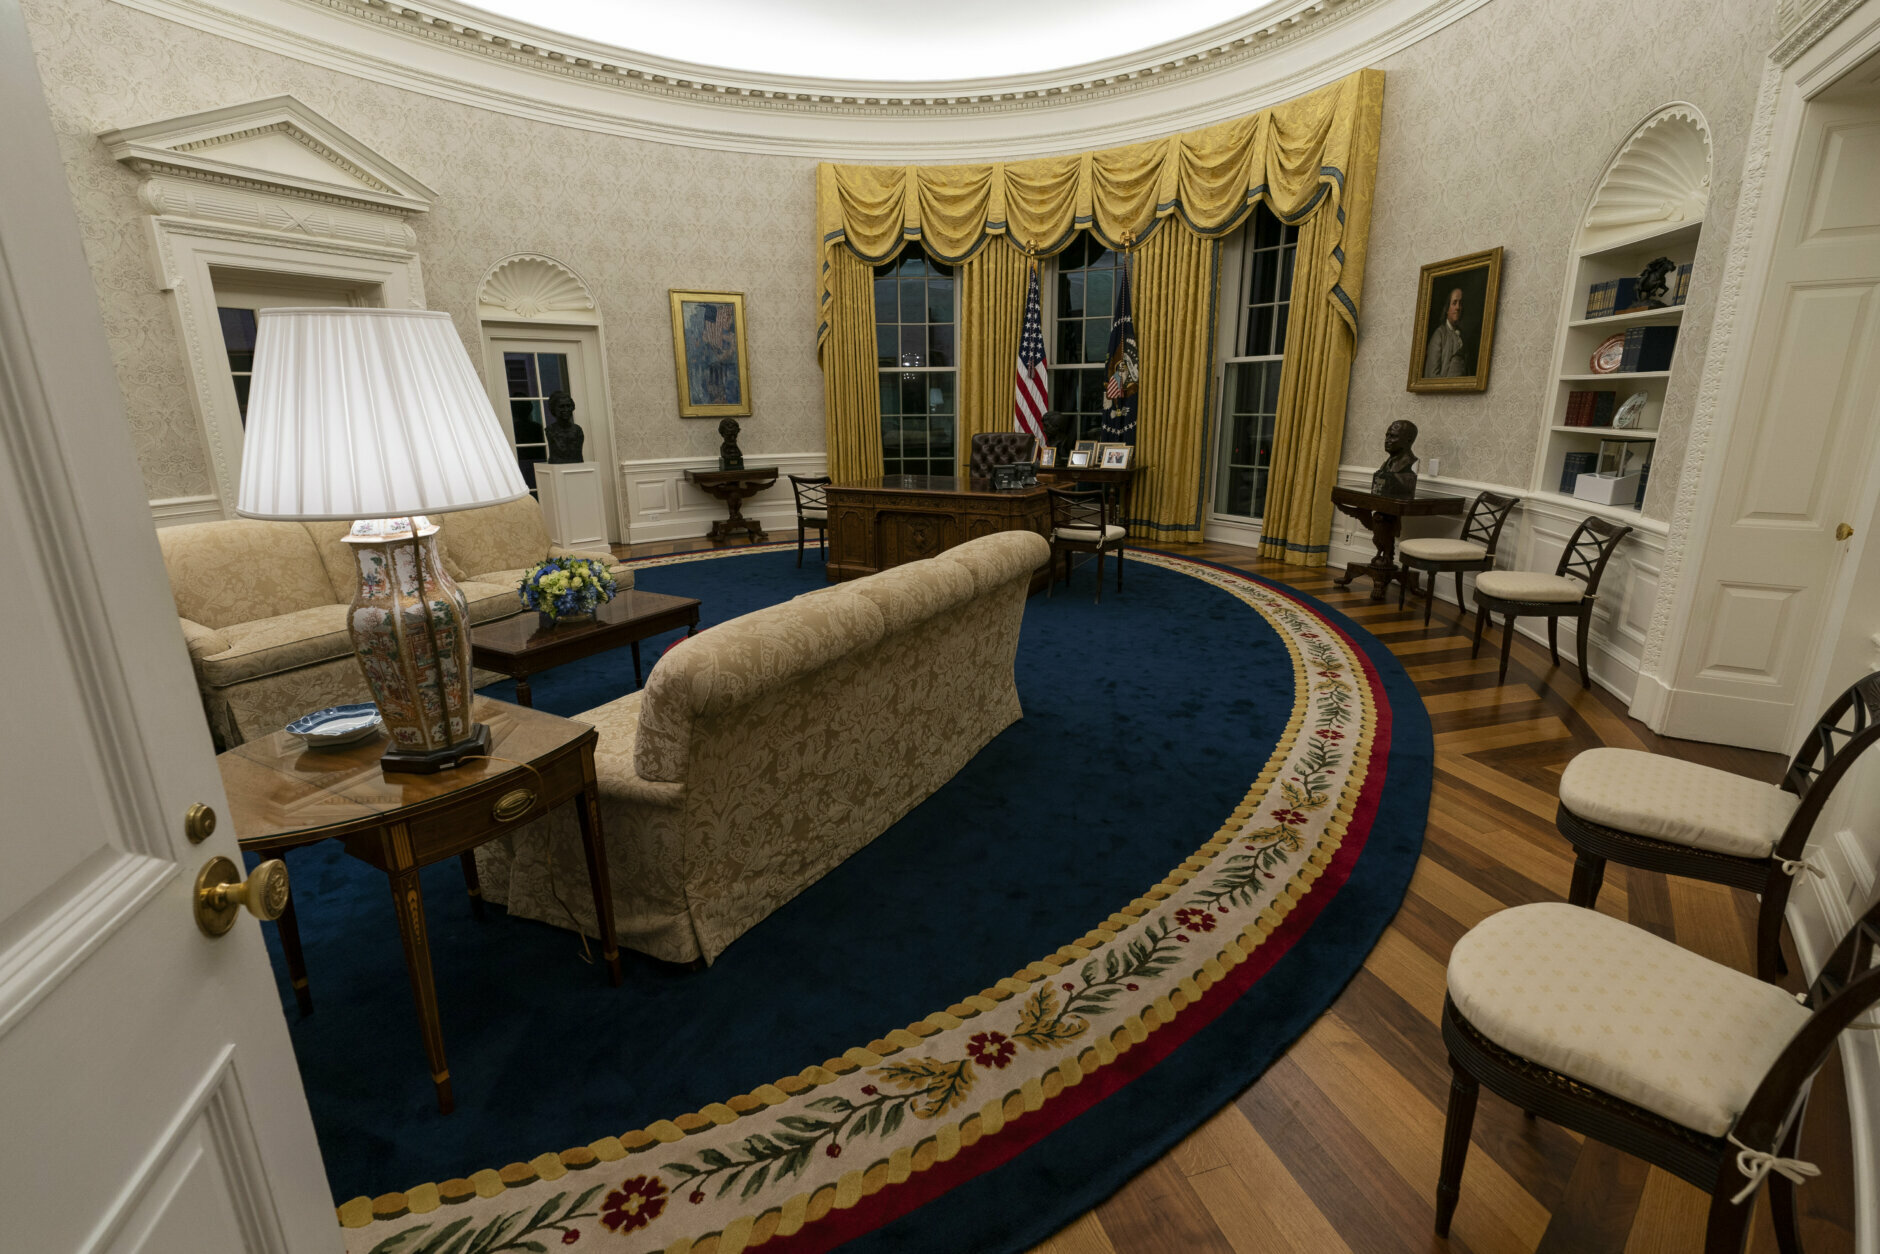 The Oval Office of the White House is newly redecorated for the first day of President Joe Biden's administration, Wednesday, Jan. 20, 2021, in Washington. (AP Photo/Alex Brandon)